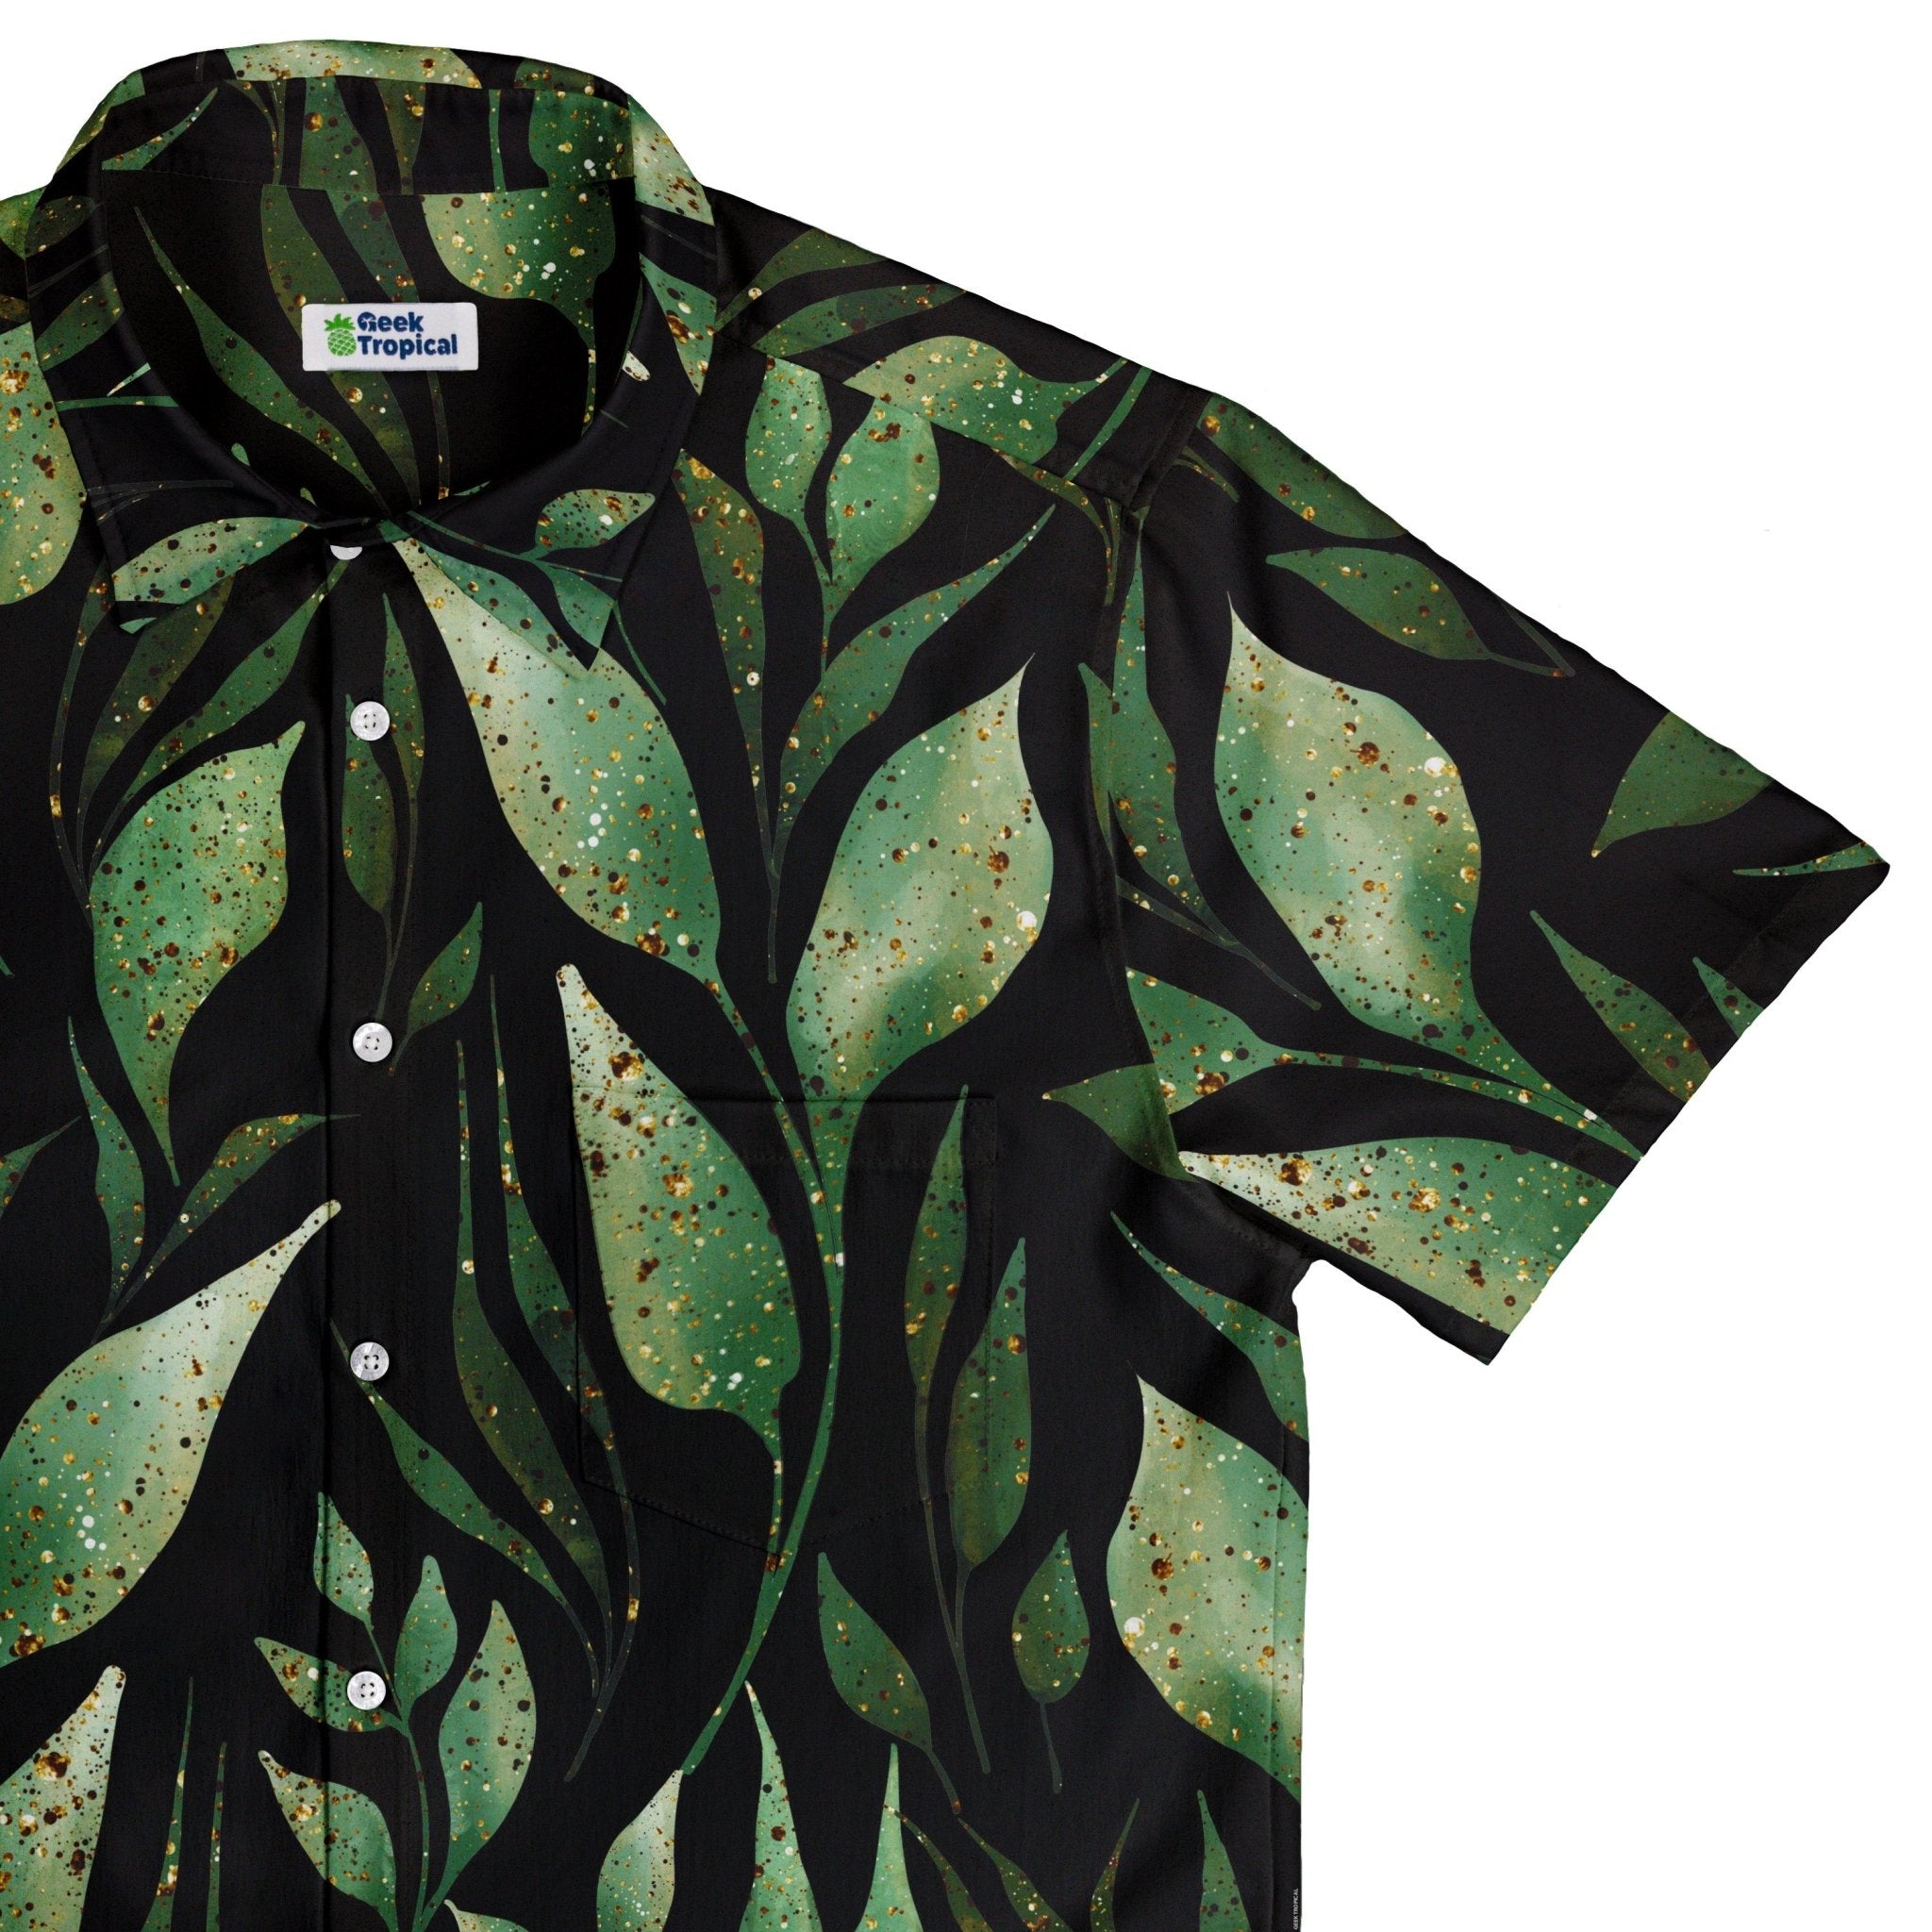 Growing Leaves Metallic Specs Button Up Shirt - adult sizing - Botany Print - Simple Patterns